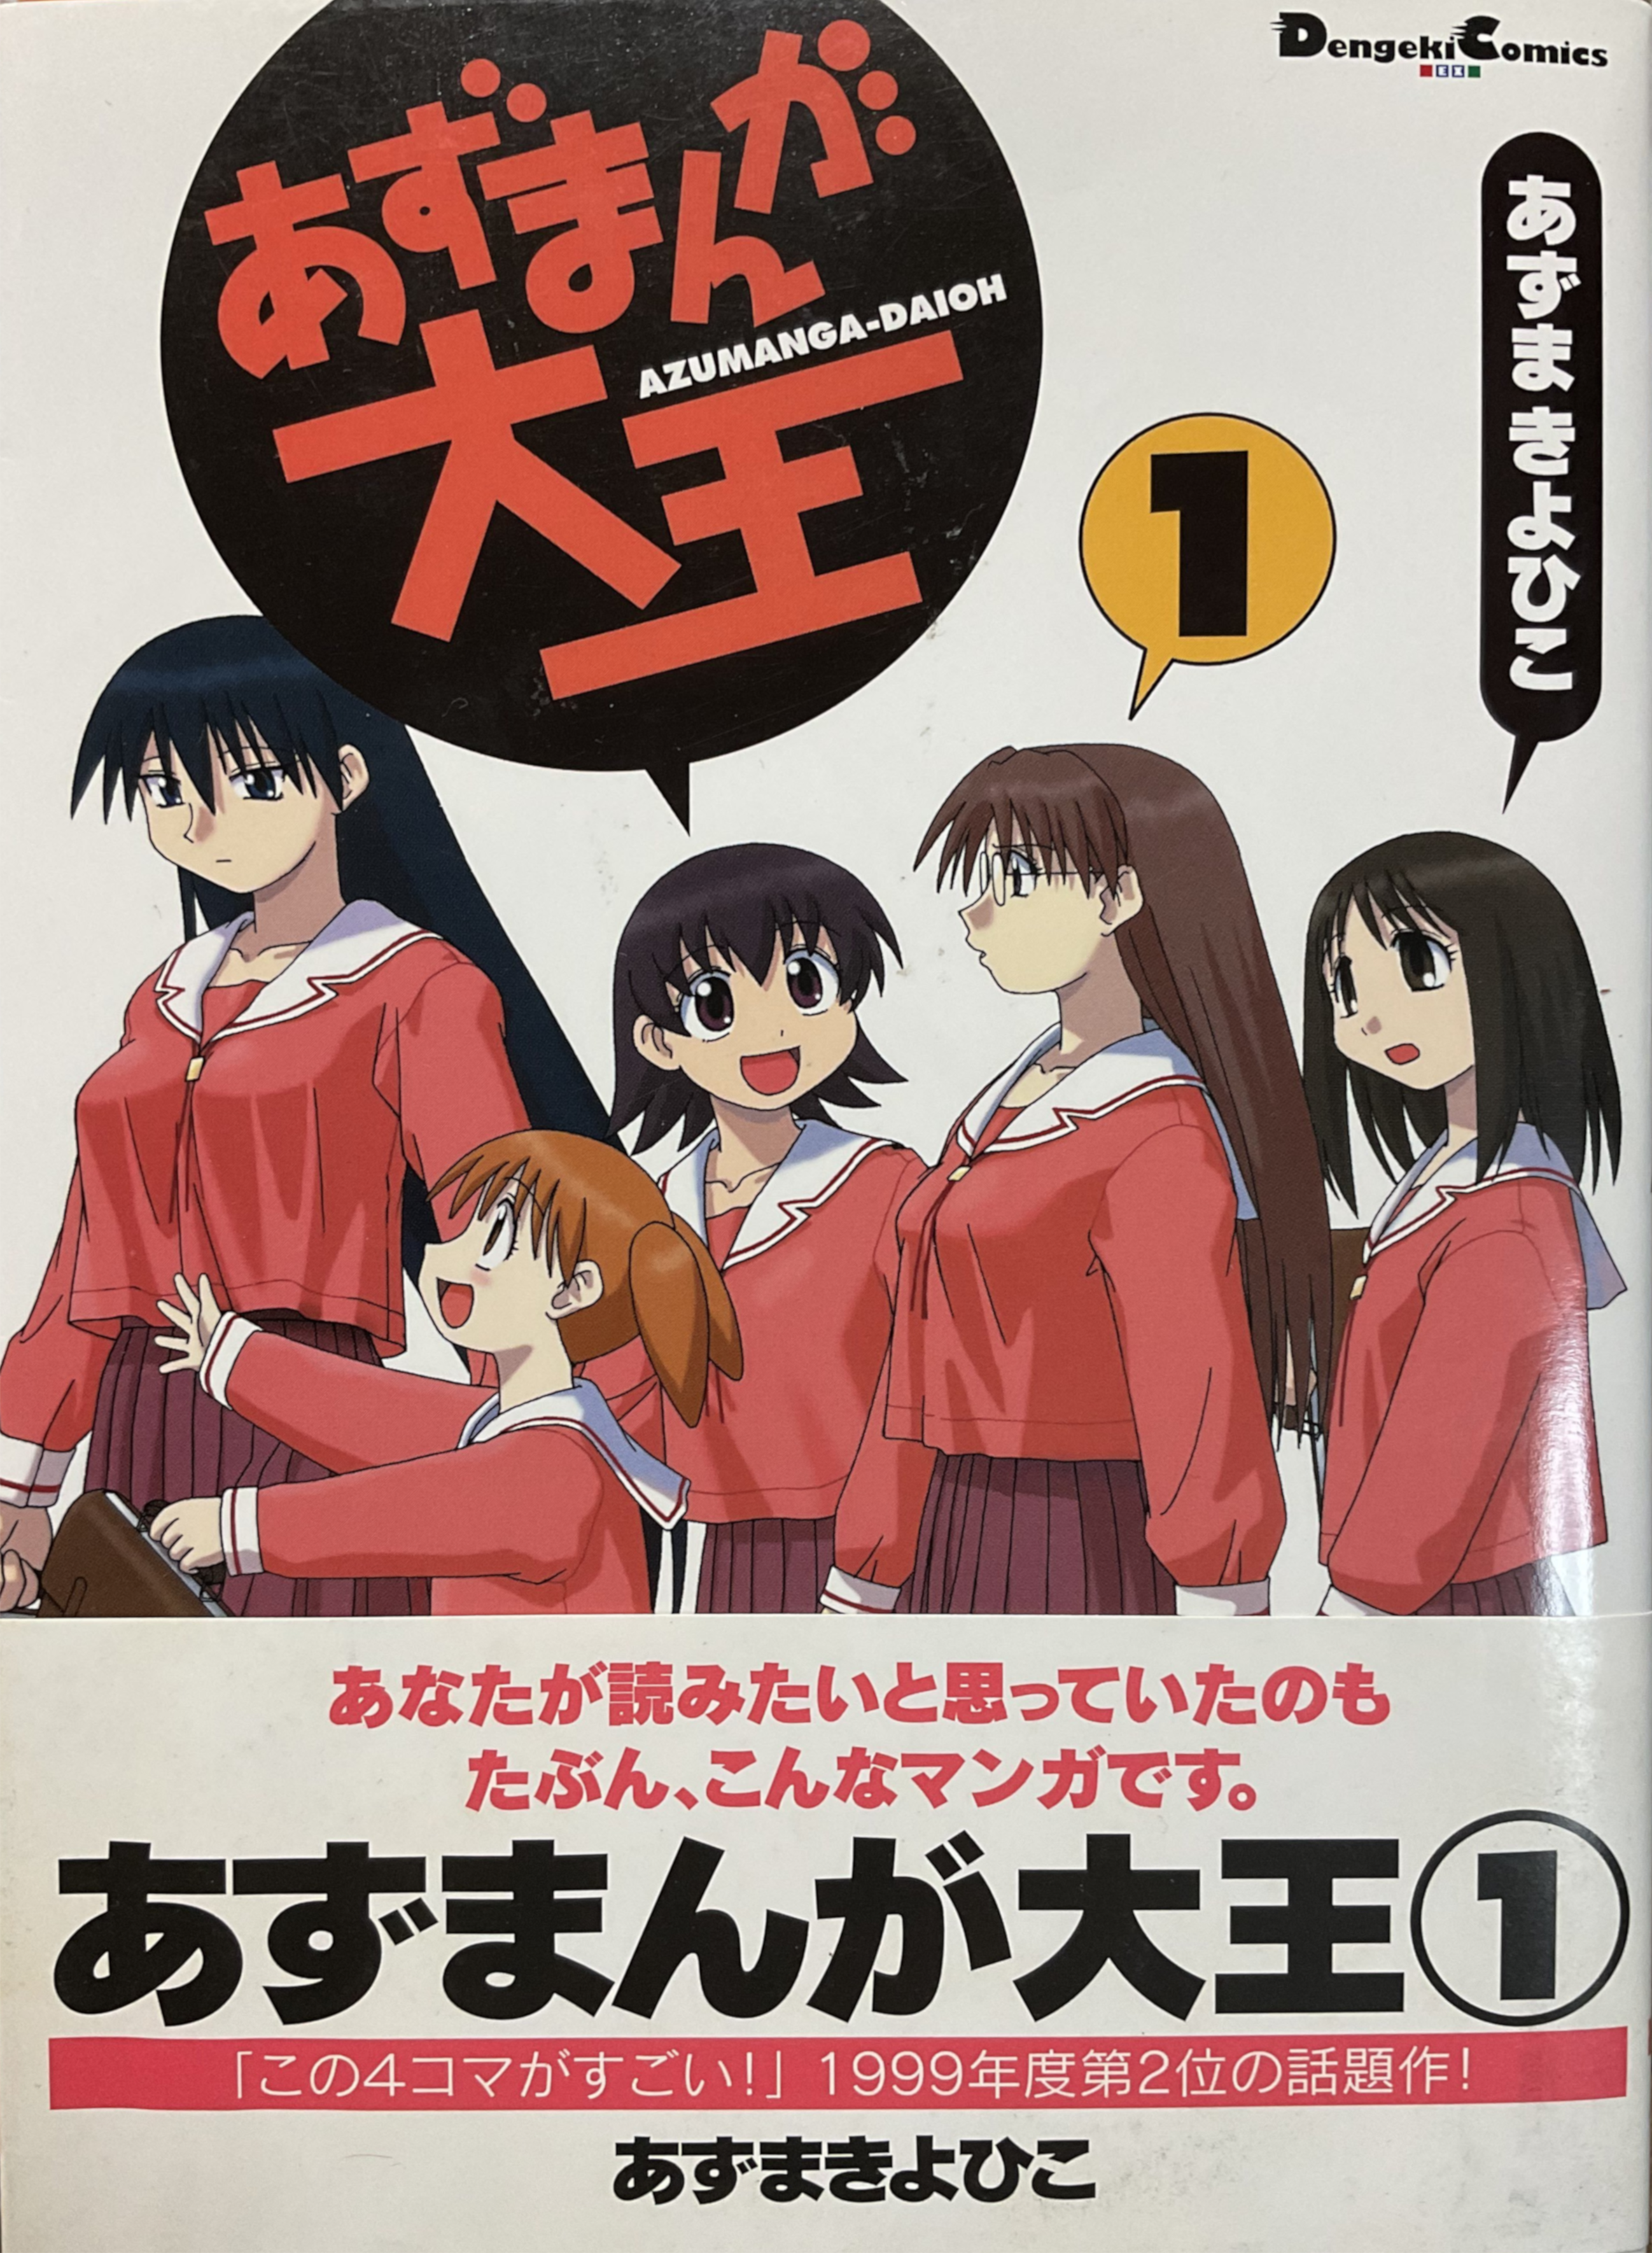 Maybe this is the manga you've been looking to read. The second-most discussed work of 1999!